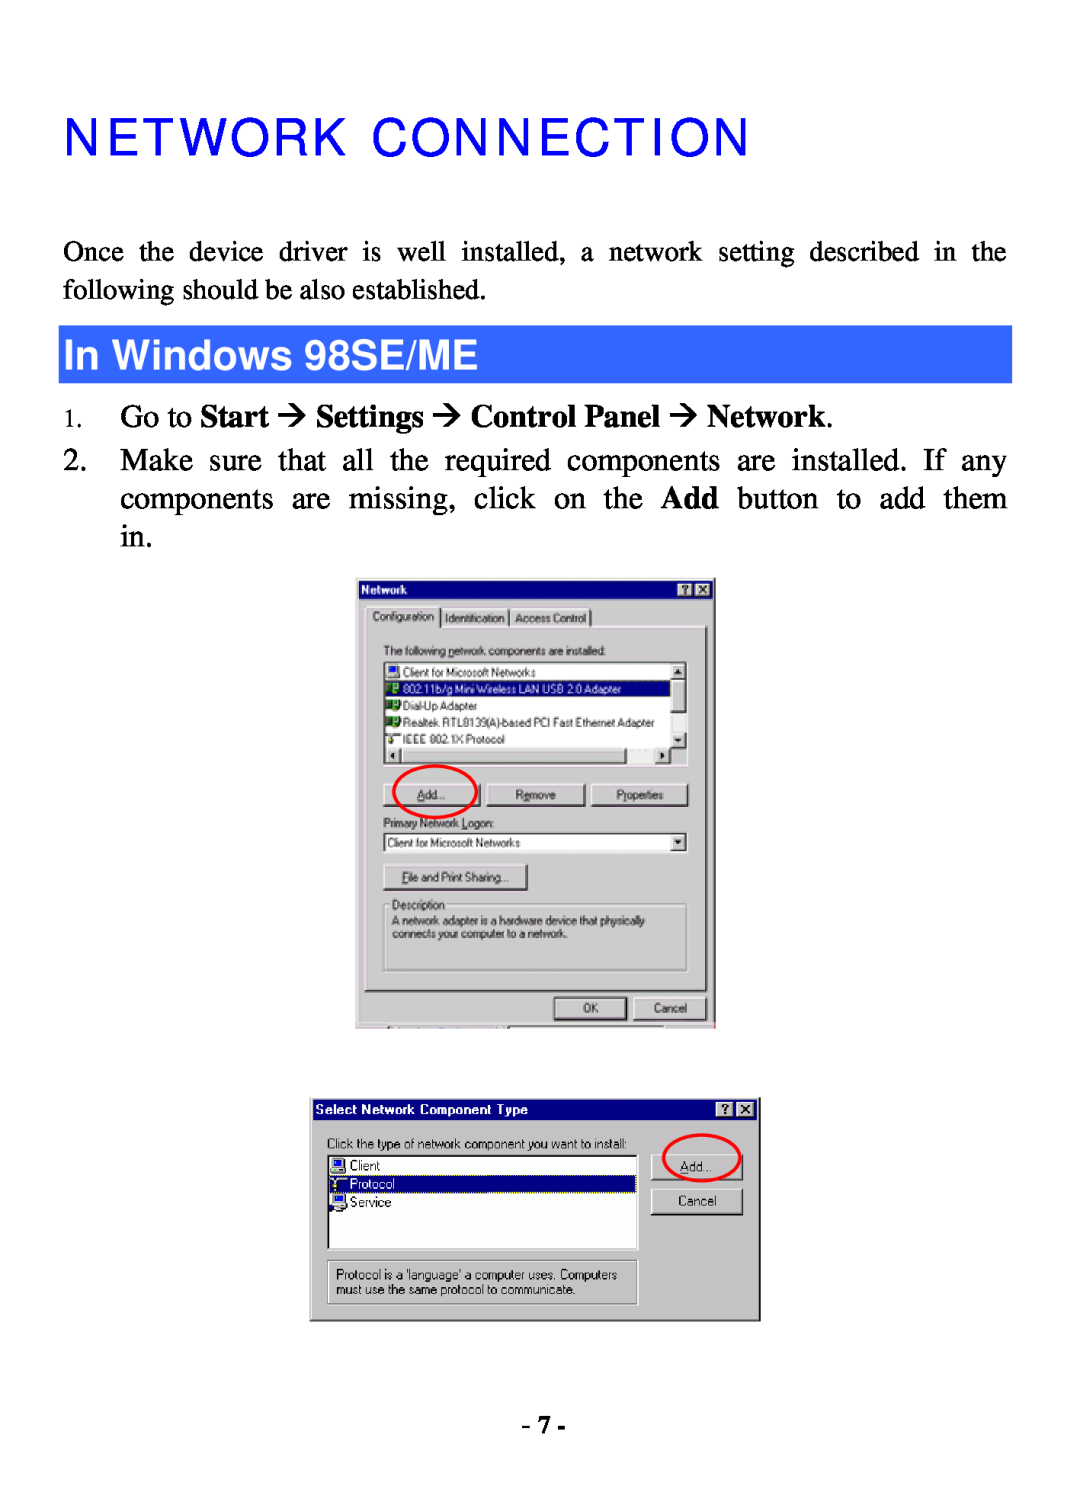 Xterasys USB Adapter user manual Network Connection, In Windows 98SE/ME, Go to Start Settings Control Panel Network 